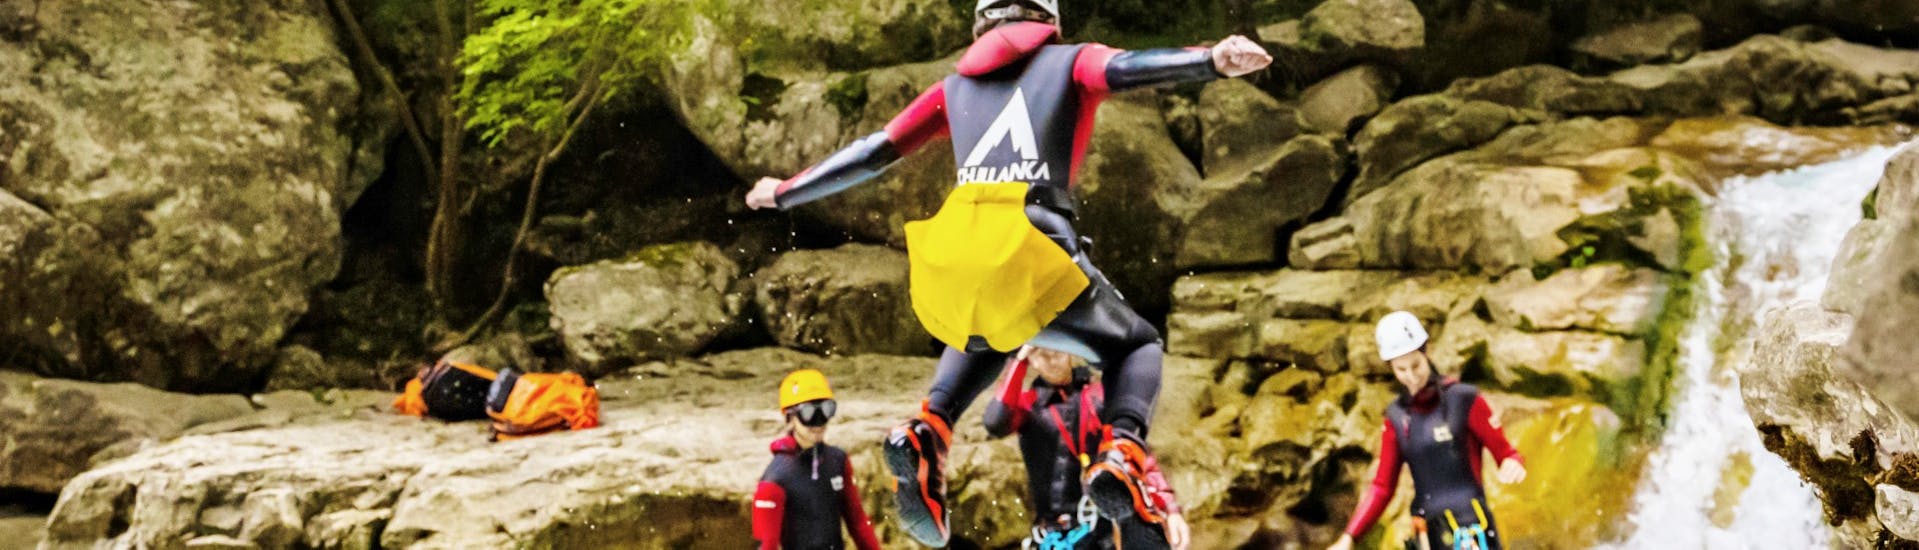 Gevorderde Canyoning in Rocchetta Nervina - Canyon of Barbaira.